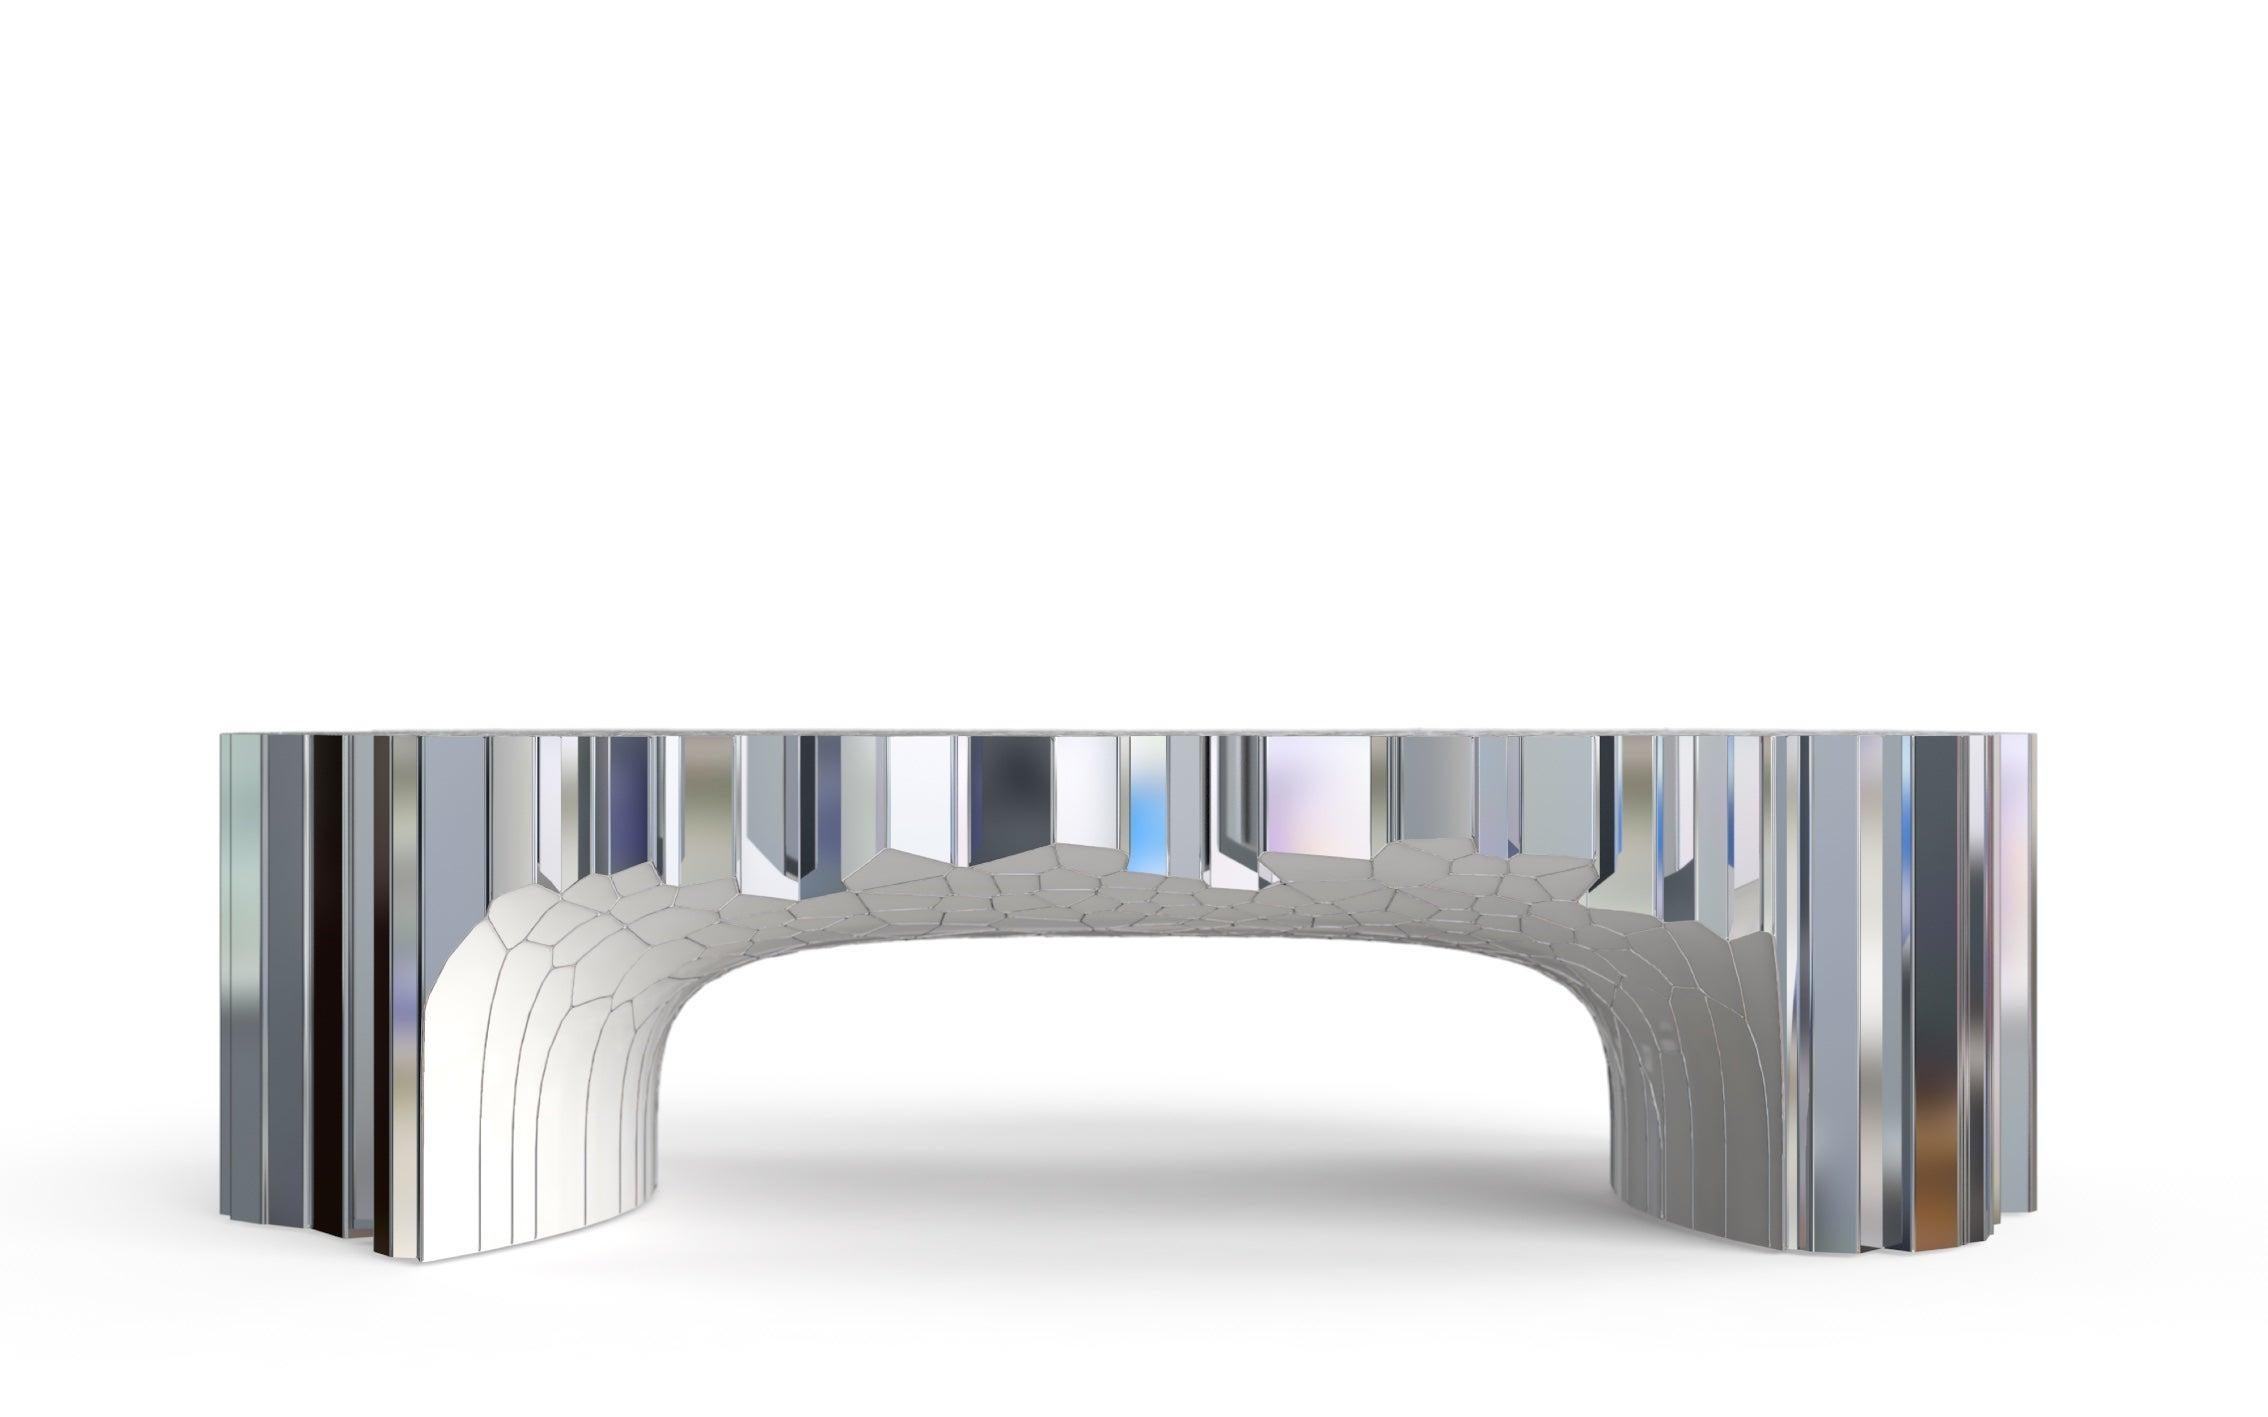 Chinese Rectangular Coffee Table 'MY Collection' by Michael Young Stainless Steel Enamel